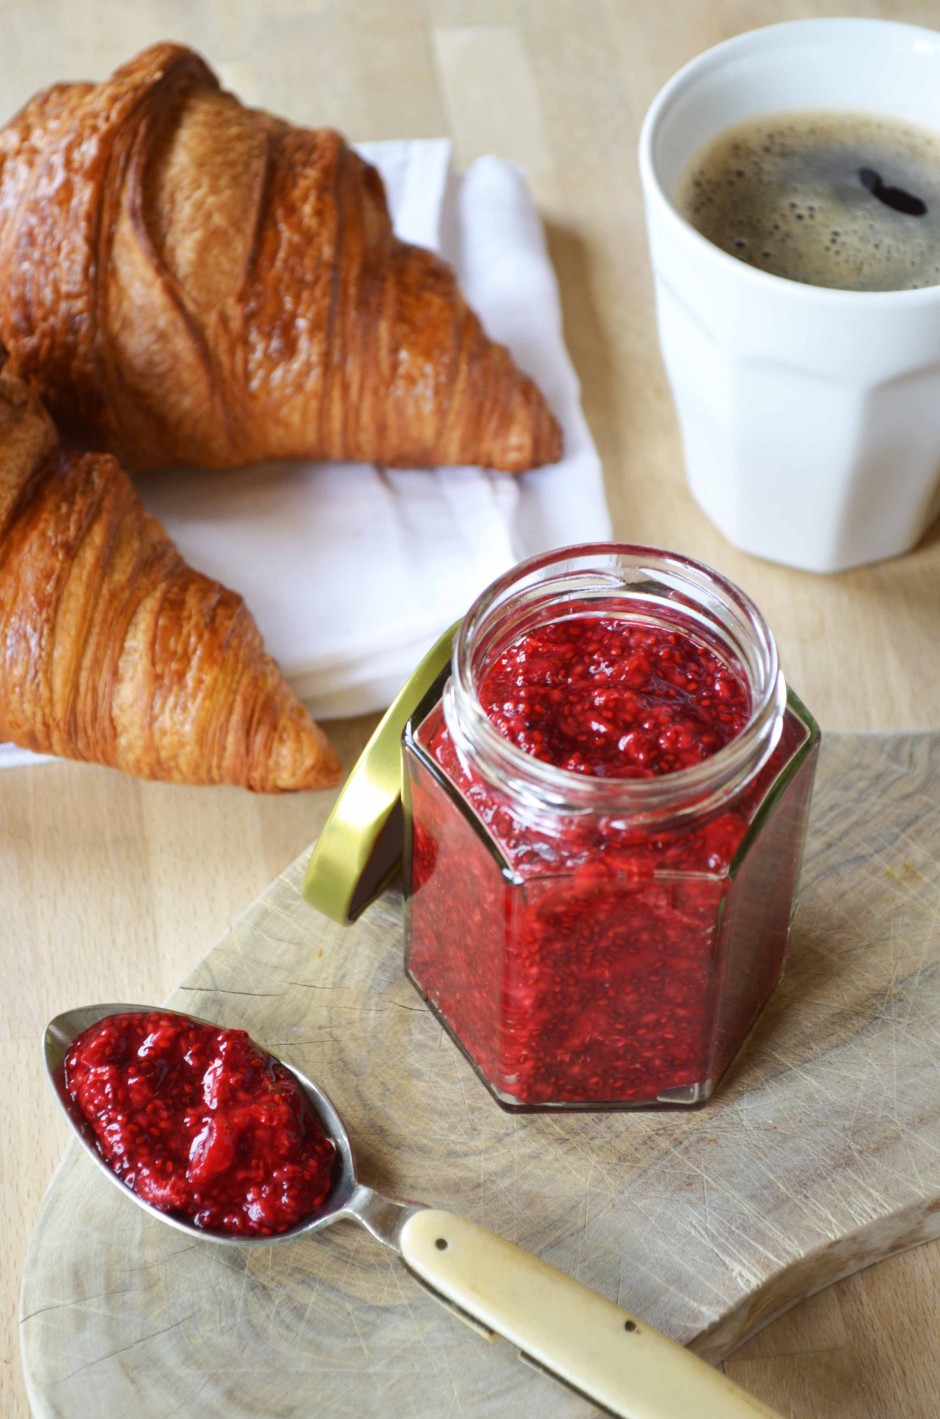 Two ingredient raspberry & chia jam. Recipe and photo by That Healthy Kitchen